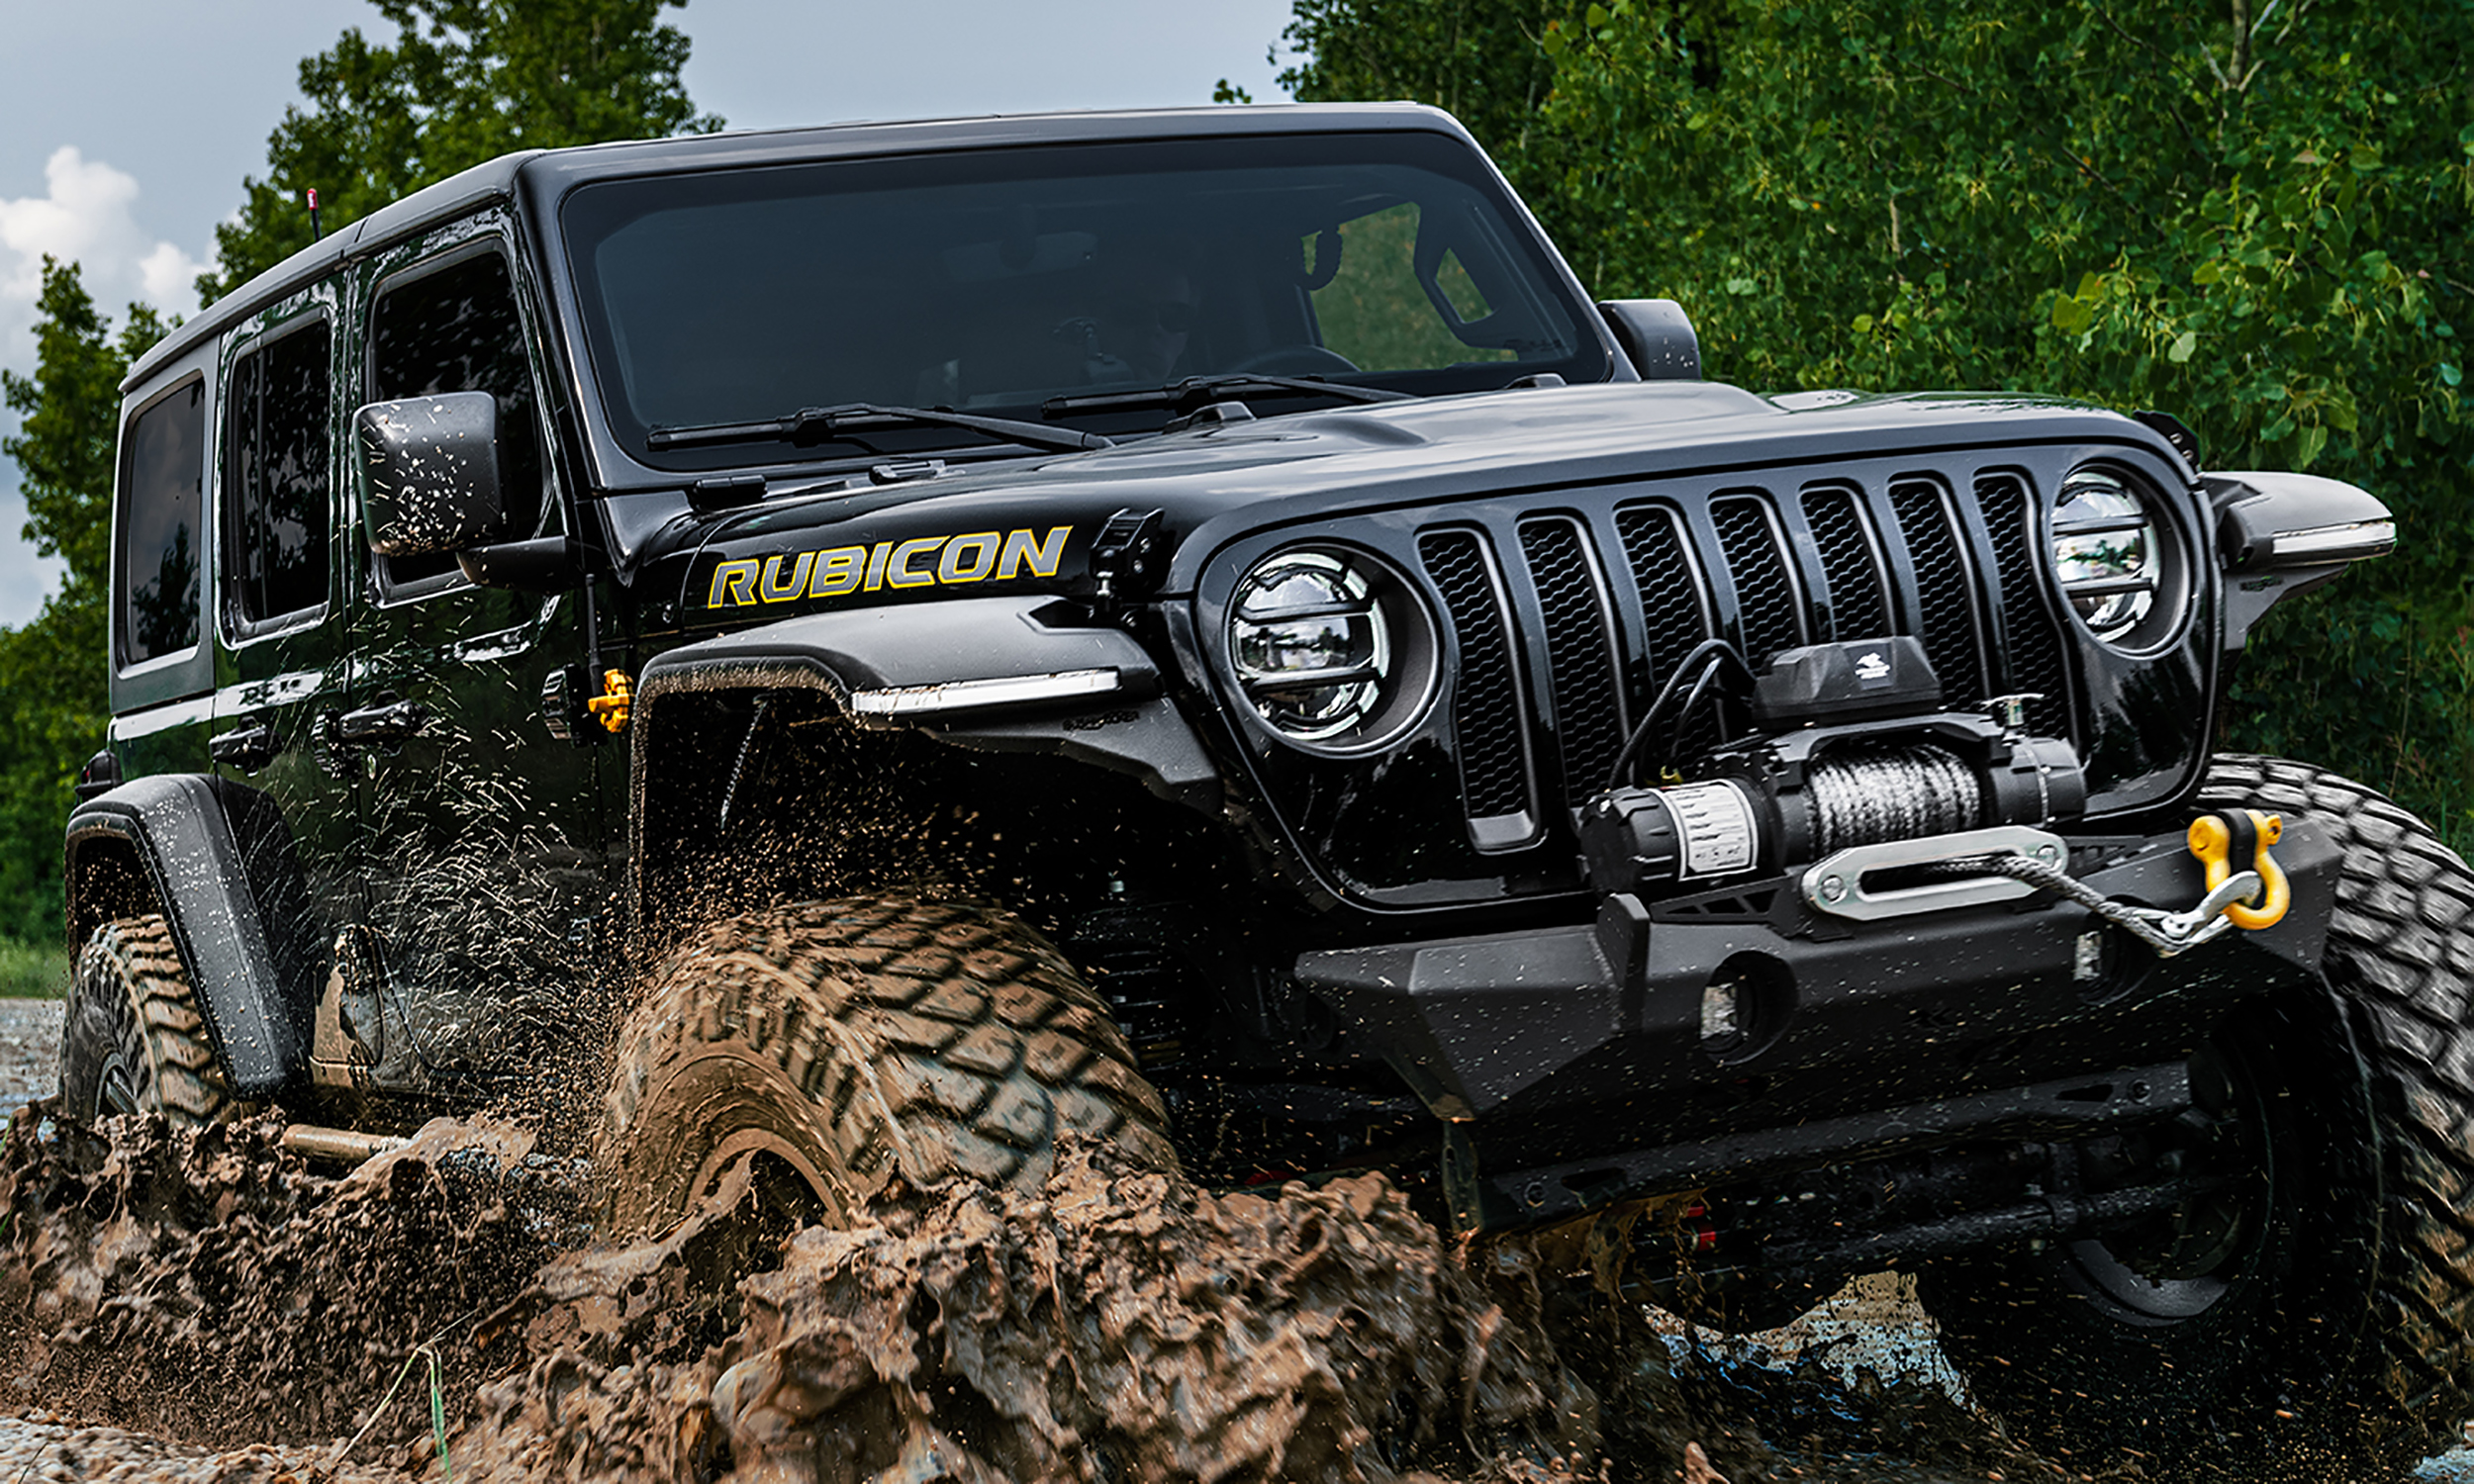 Jeep Wrangler with Bushwacker fender flares in muddy off-road